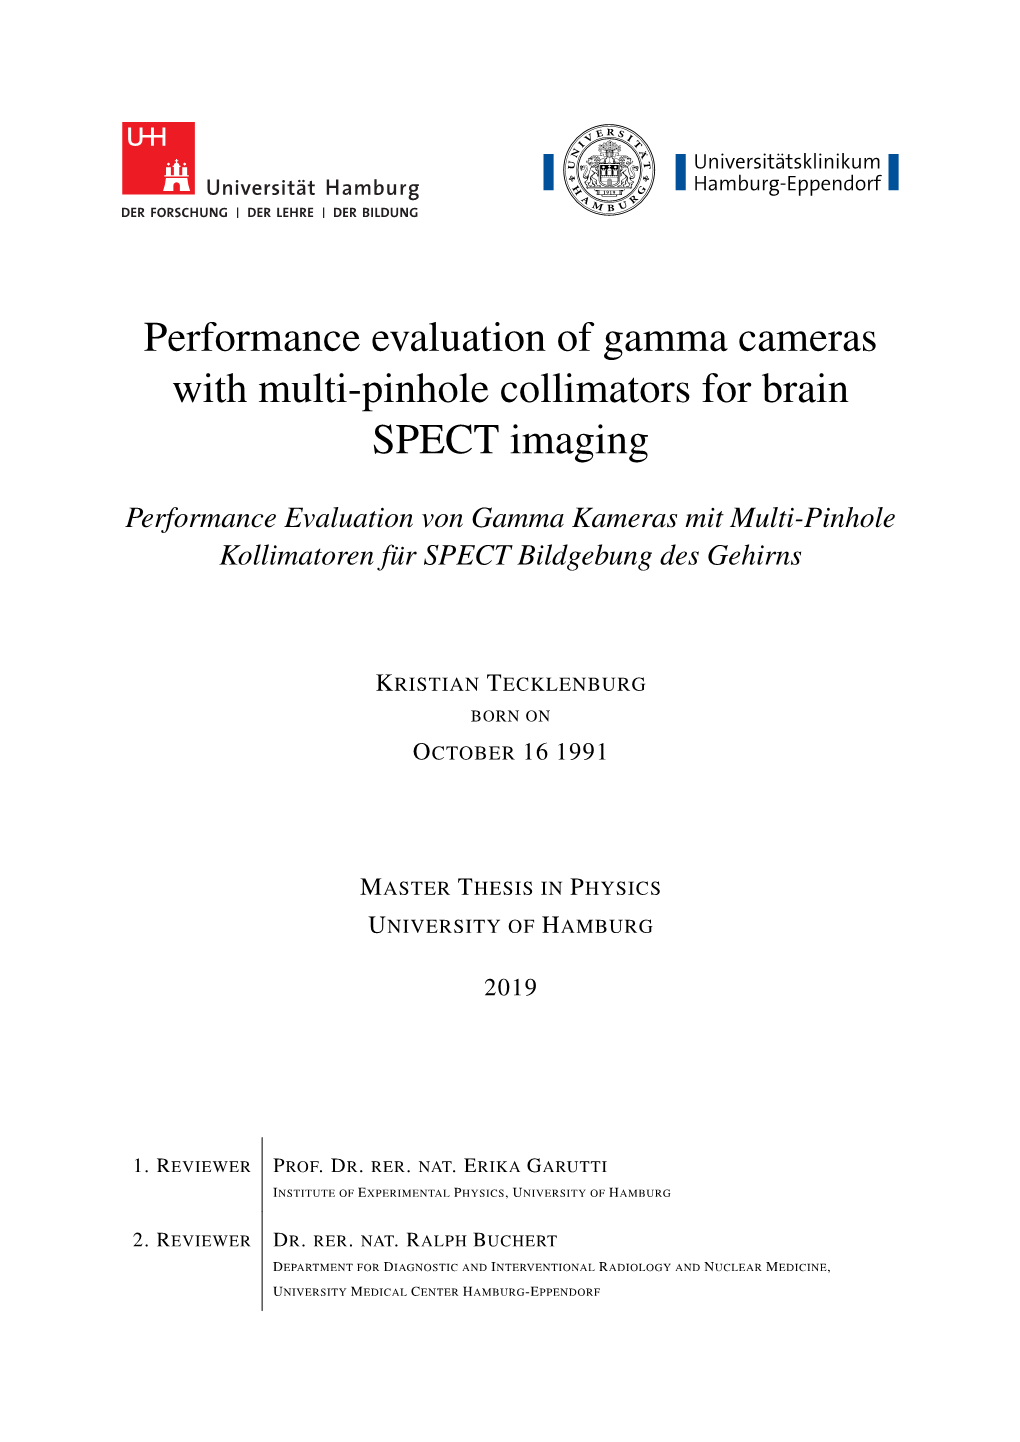 Performance Evaluation of Gamma Cameras with Multi-Pinhole Collimators for Brain SPECT Imaging